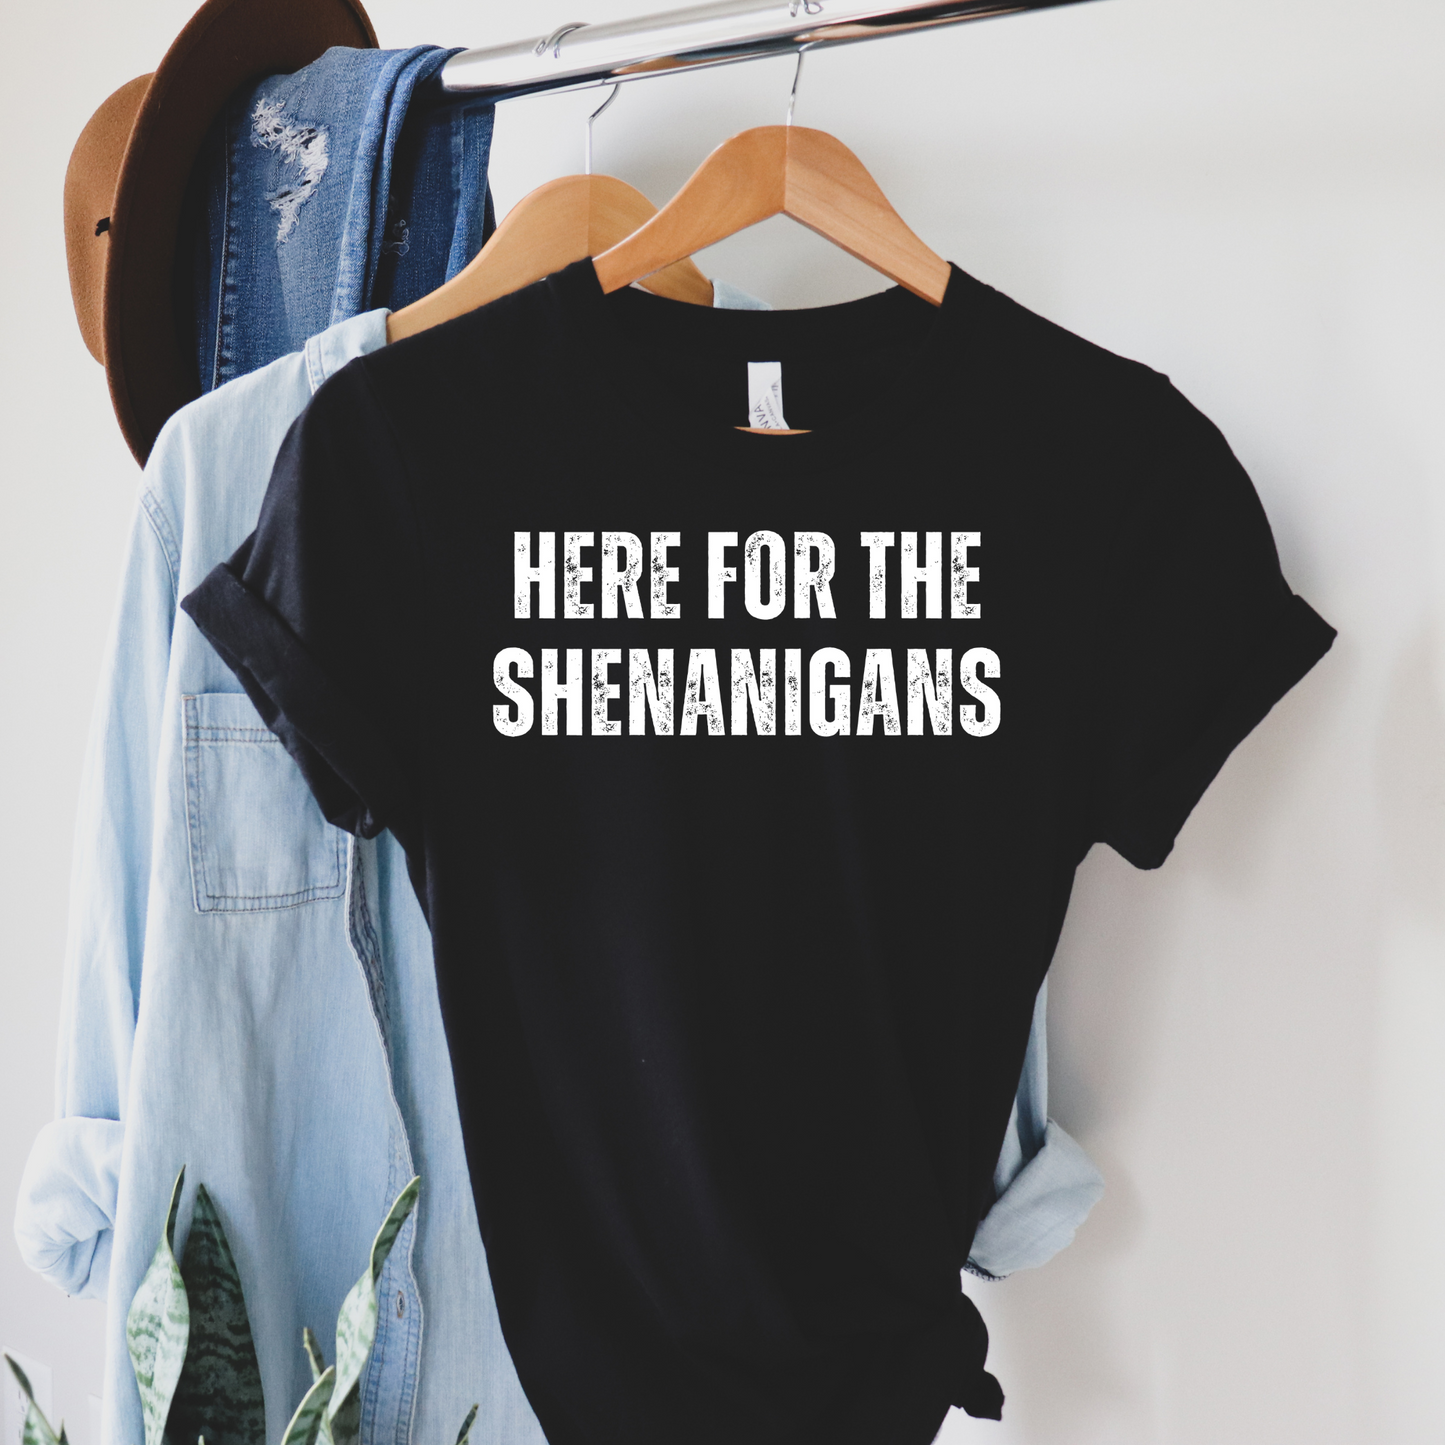 Here for the Shenanigans - T-shirt